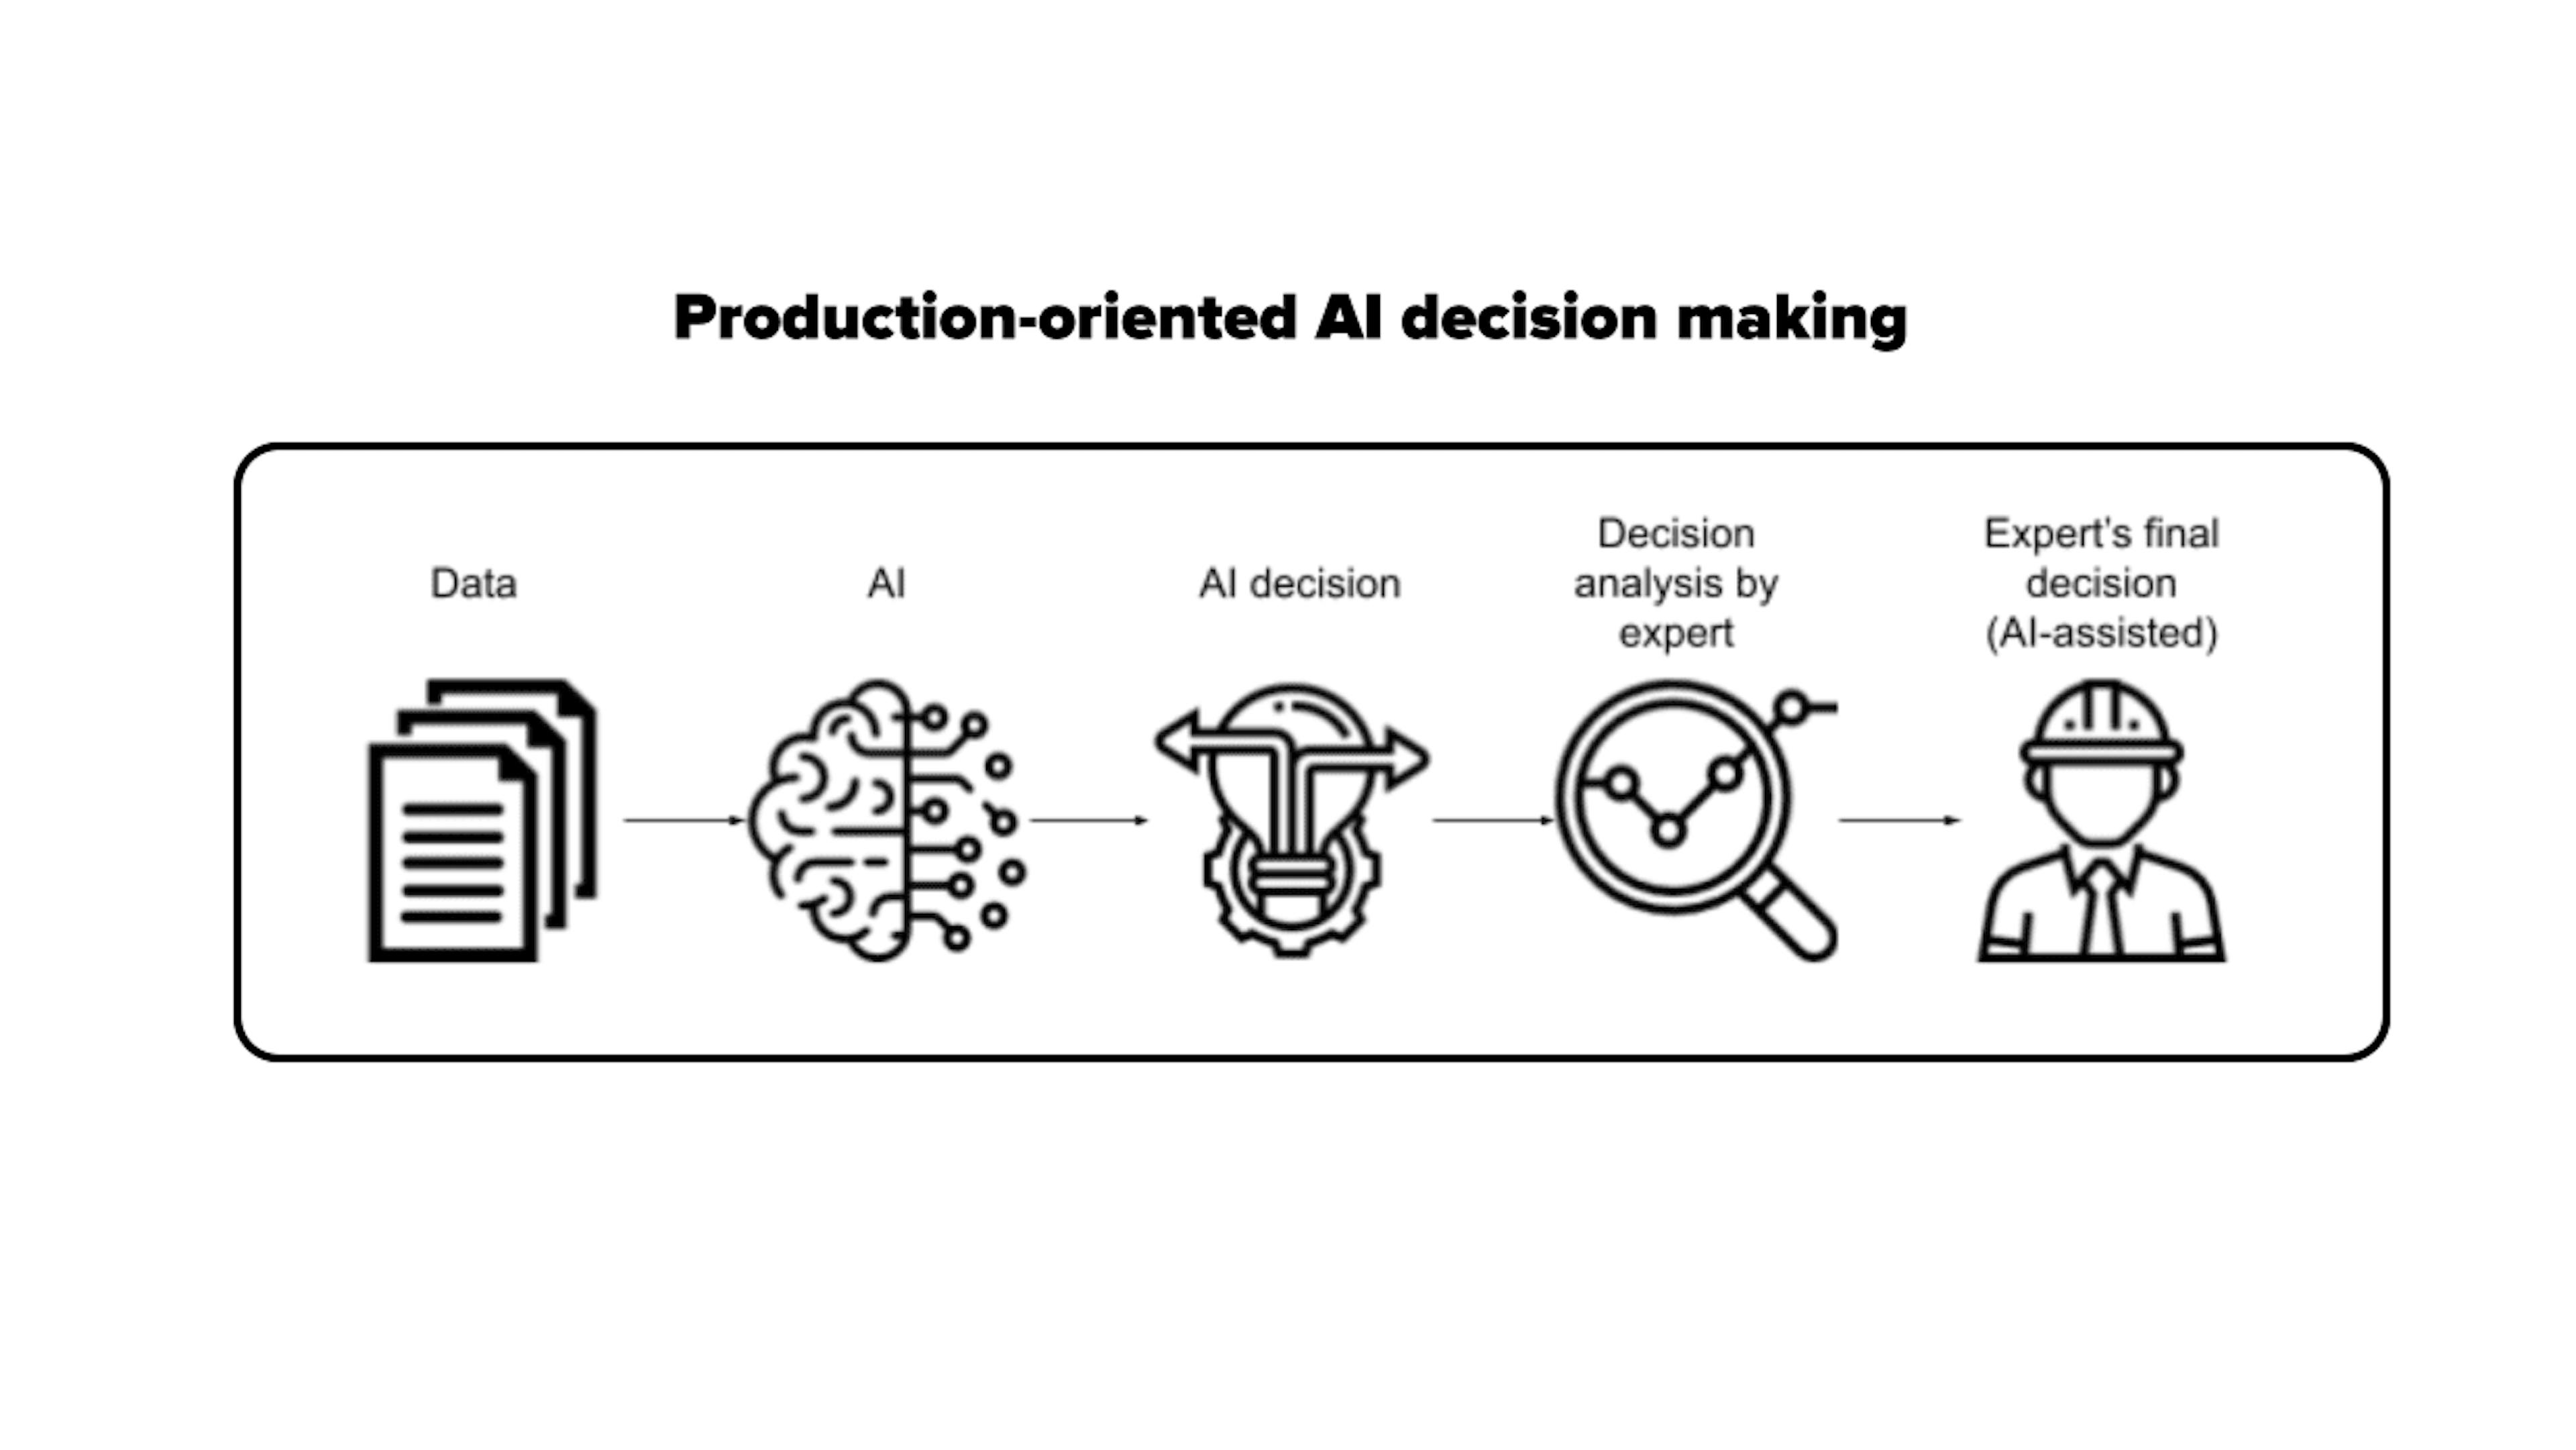 Production-oriented AI workflow